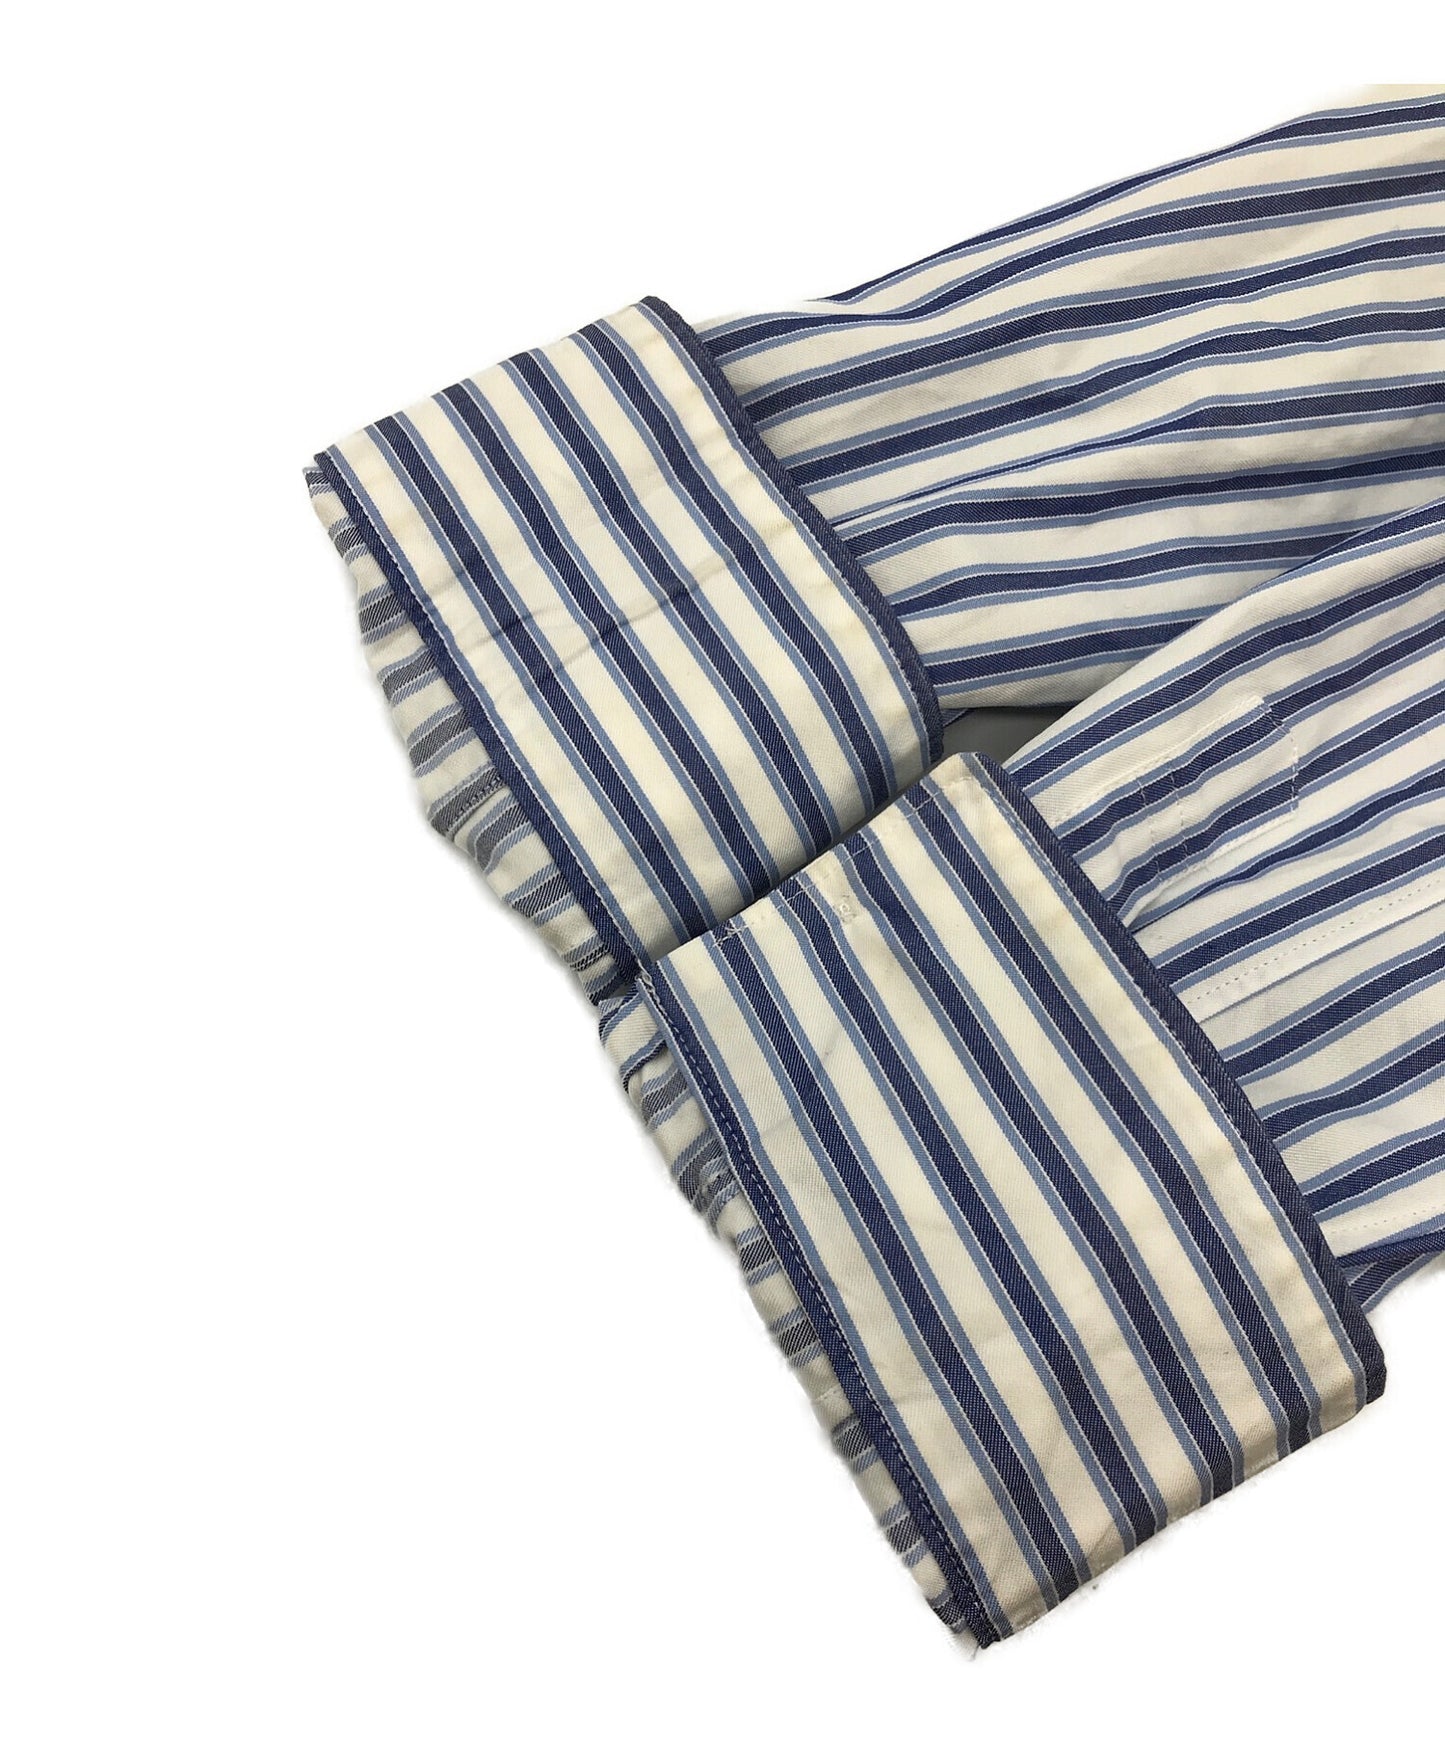 [Pre-owned] COMME des GARCONS HOMME PLUS Striped and Checked Switched Shirt Shirt Long Sleeved Shirt PF-B012